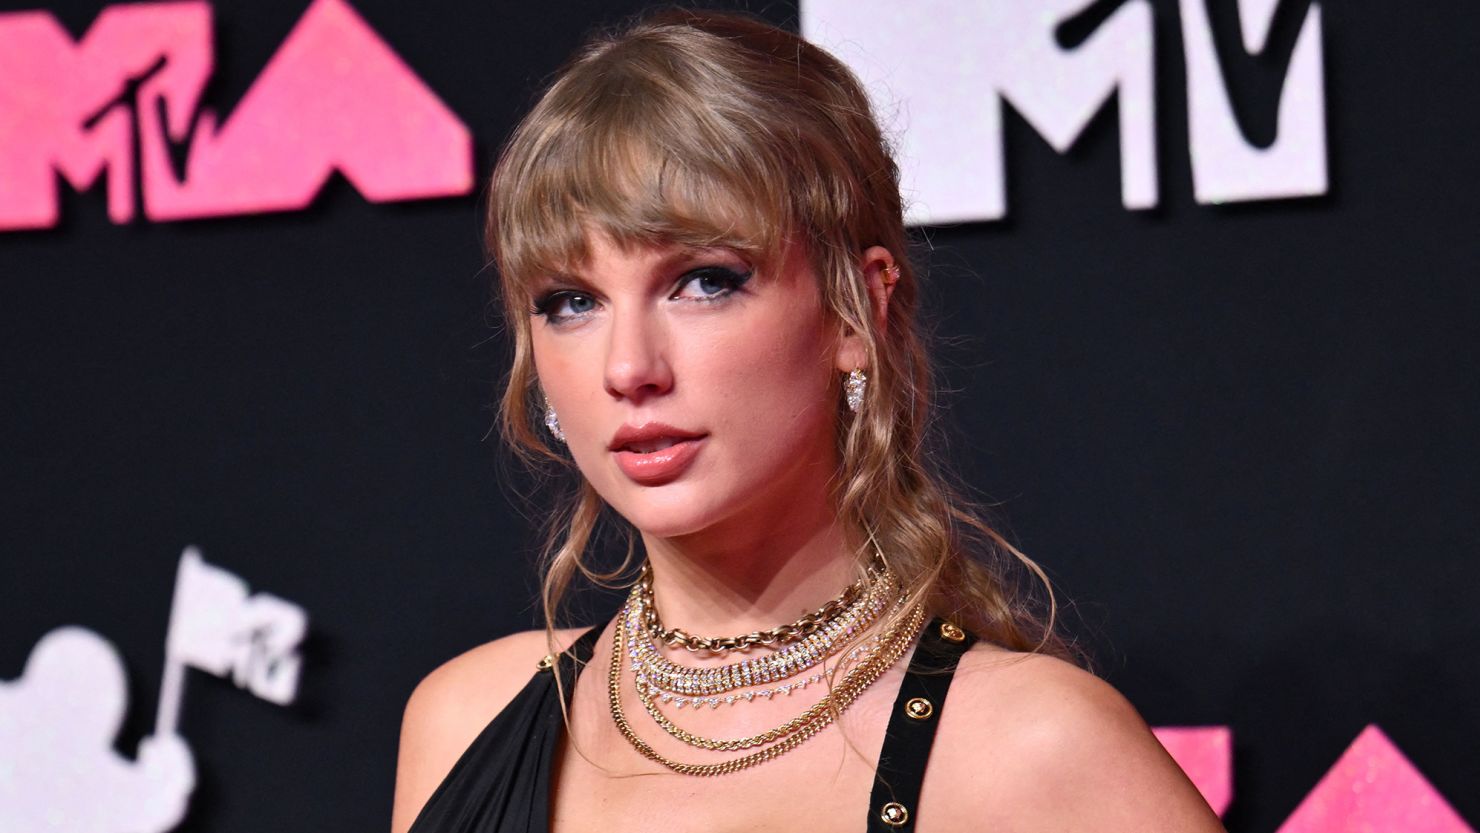 Taylor Swift will be the subject of an academic conference held in Melbourne next year.